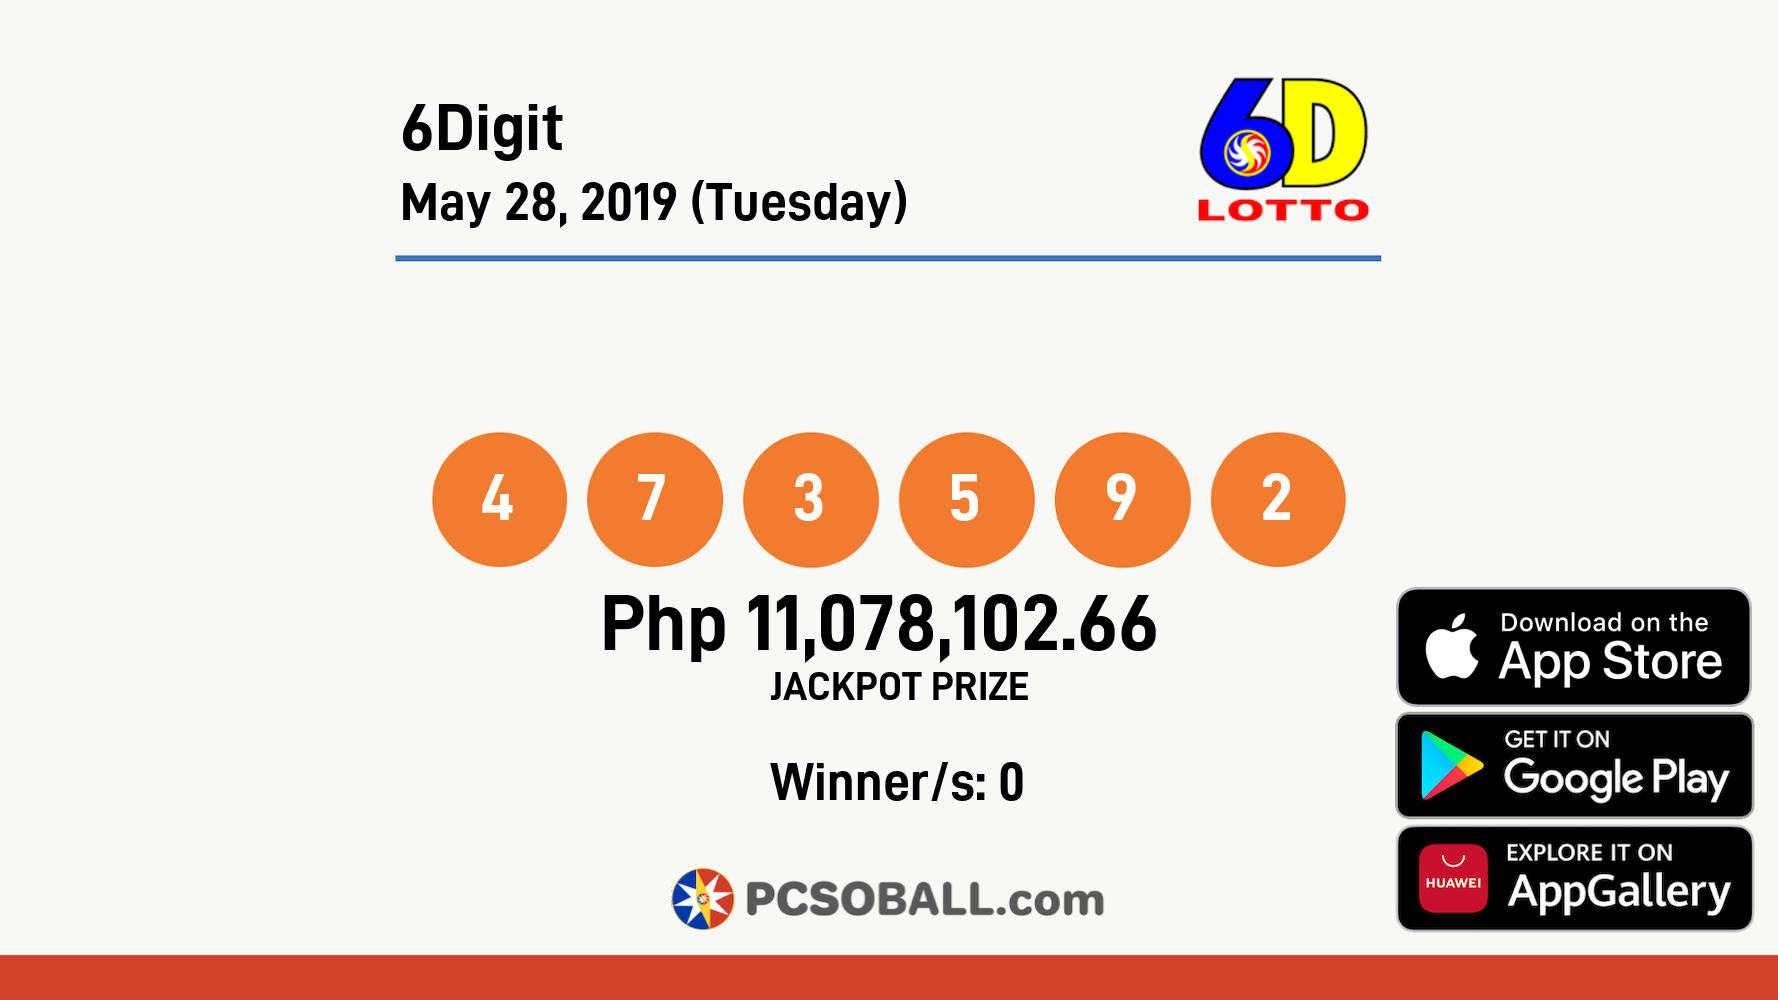 6Digit May 28, 2019 (Tuesday) Result